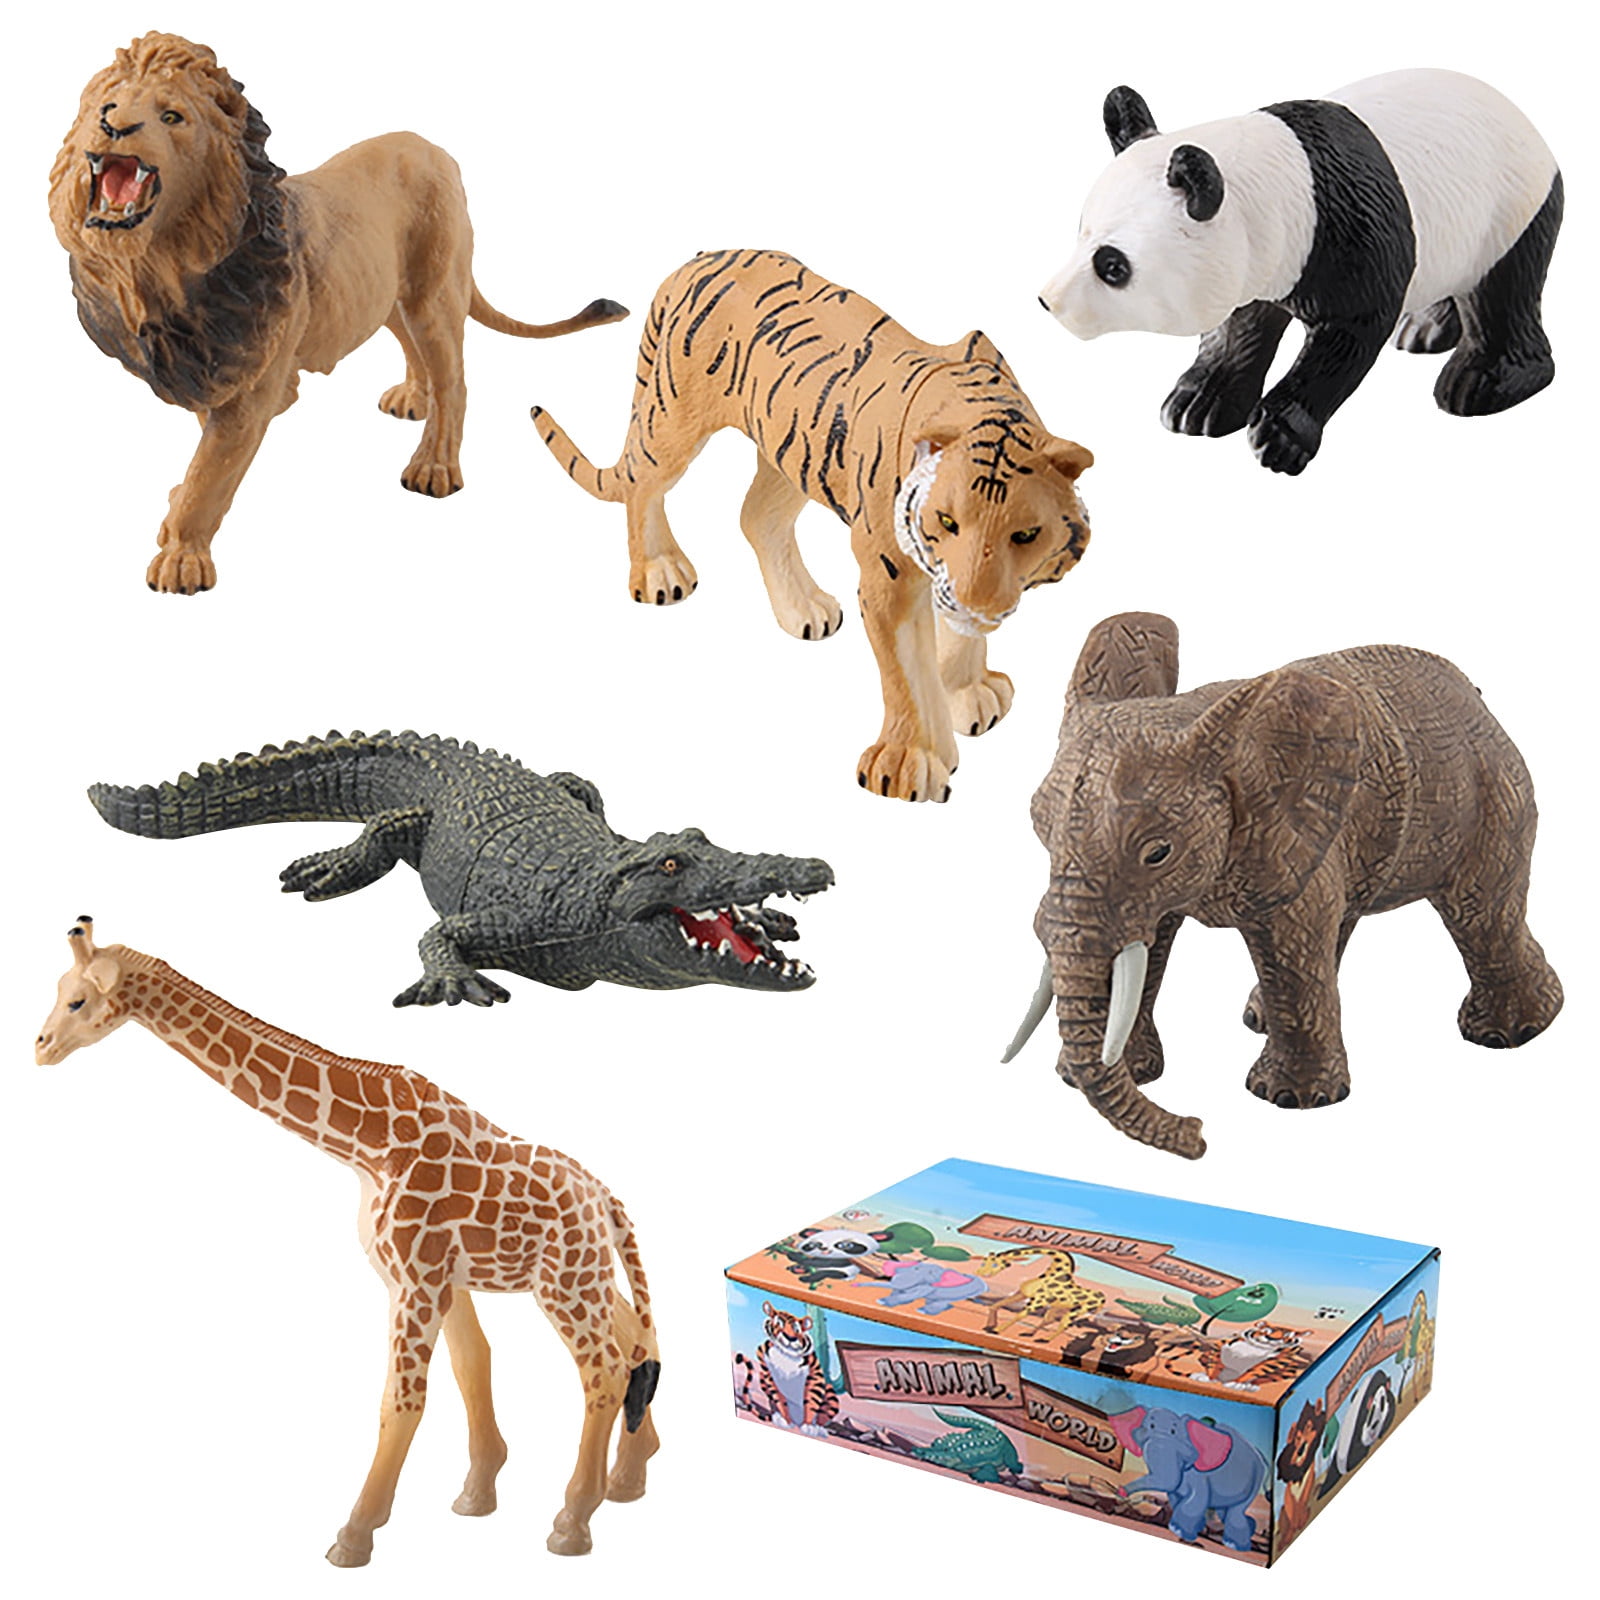 Yrtoes Toys For 3 Year Old Boys Toys for 5 Year Old Boys Animal Toys  Figurines Zoo Pack for Kids Gift Preschool Educational 6 Animals Set -  